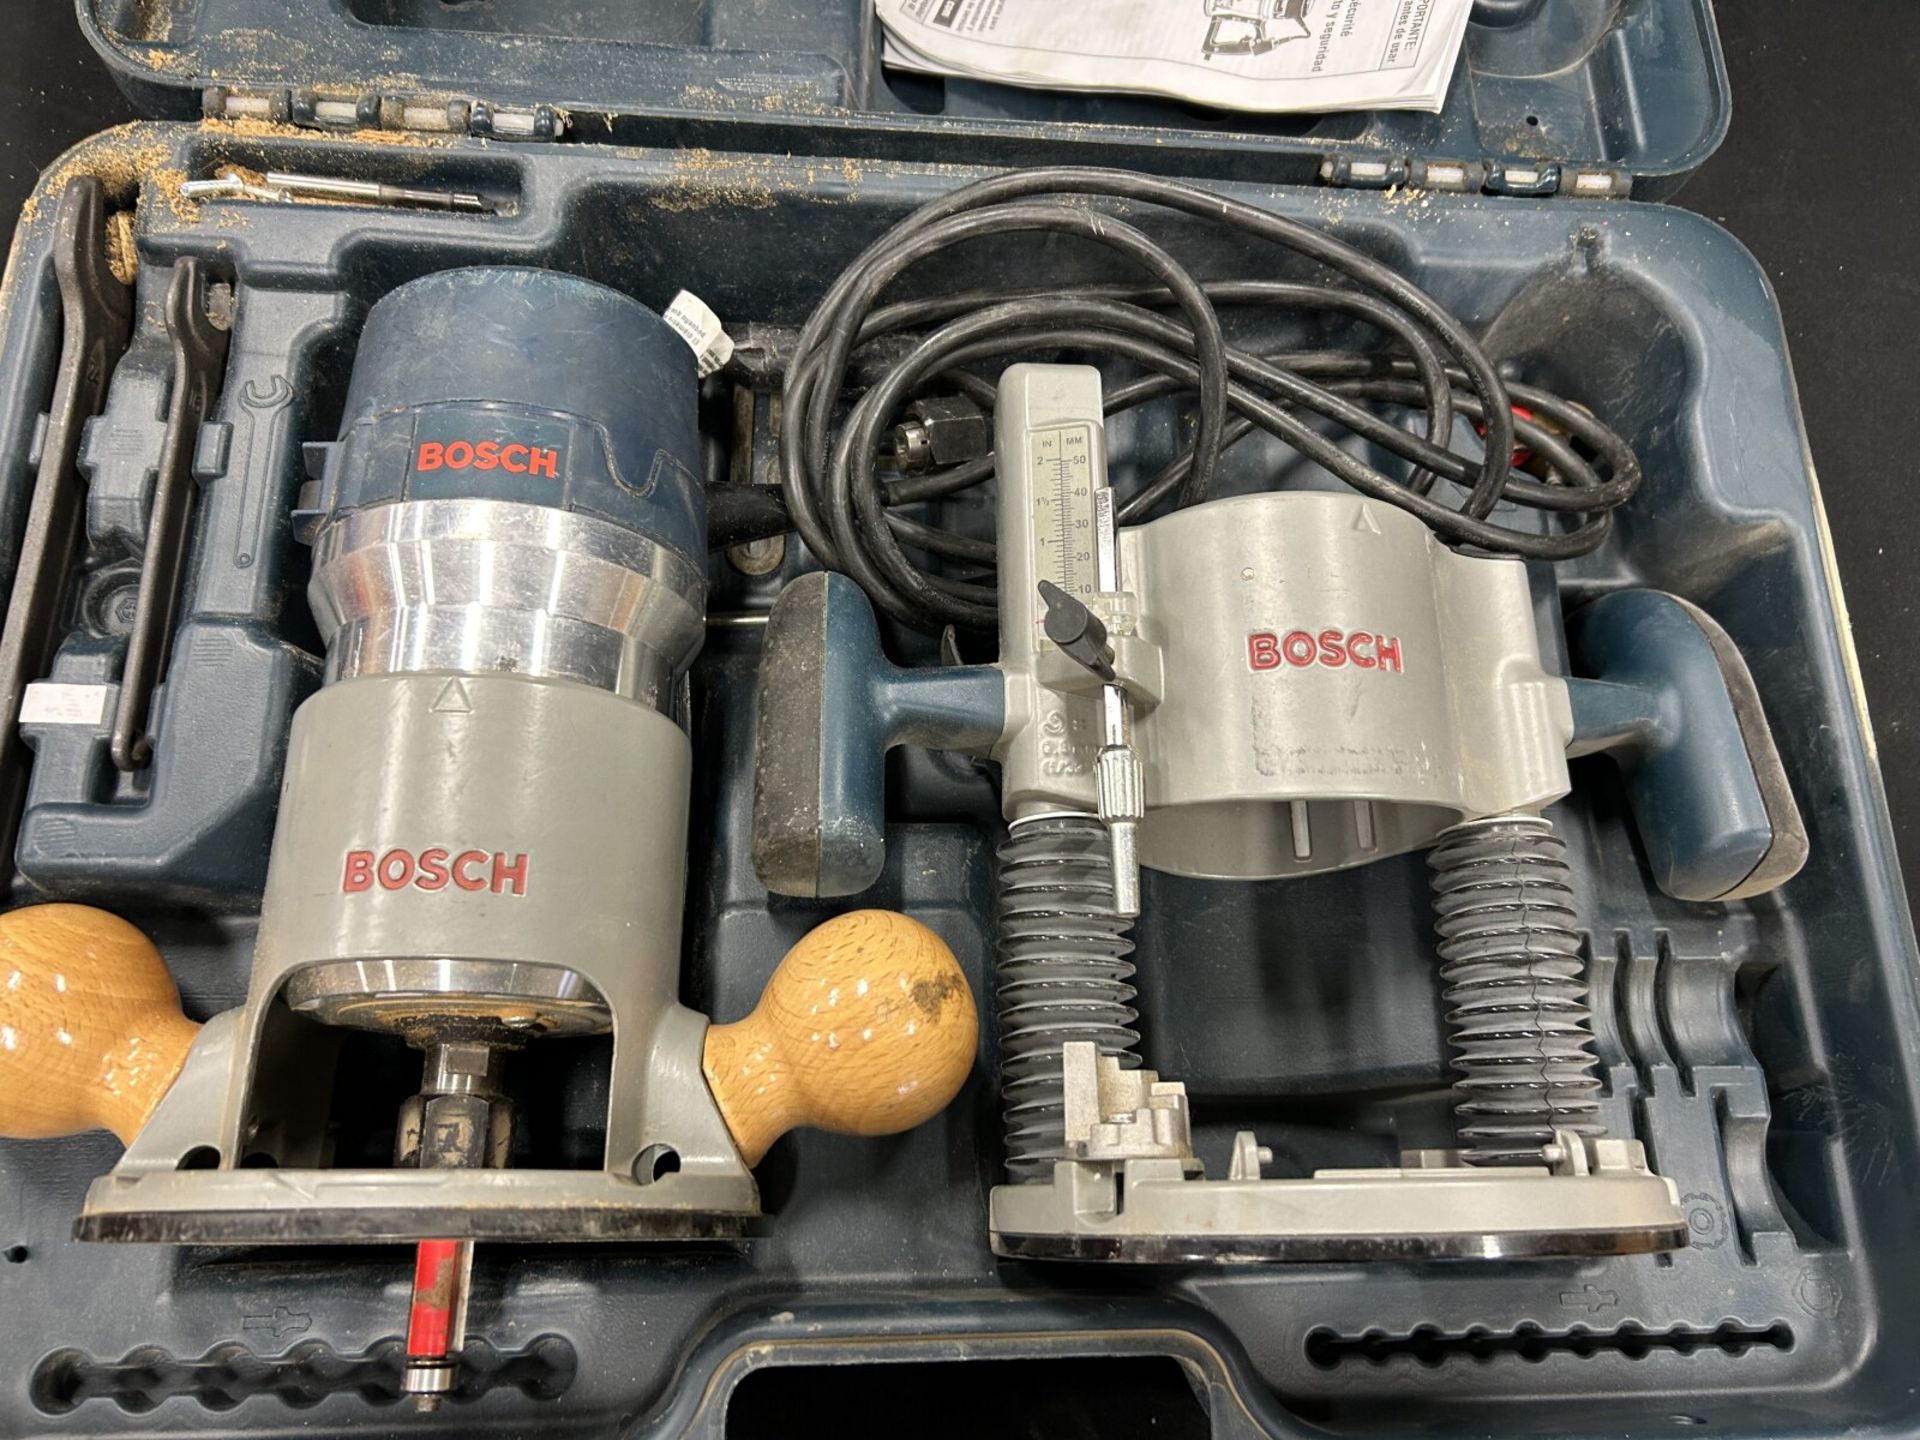 BOSCH PLUNGE ROUTER KIT WITH VARIABLE SPEED - A48